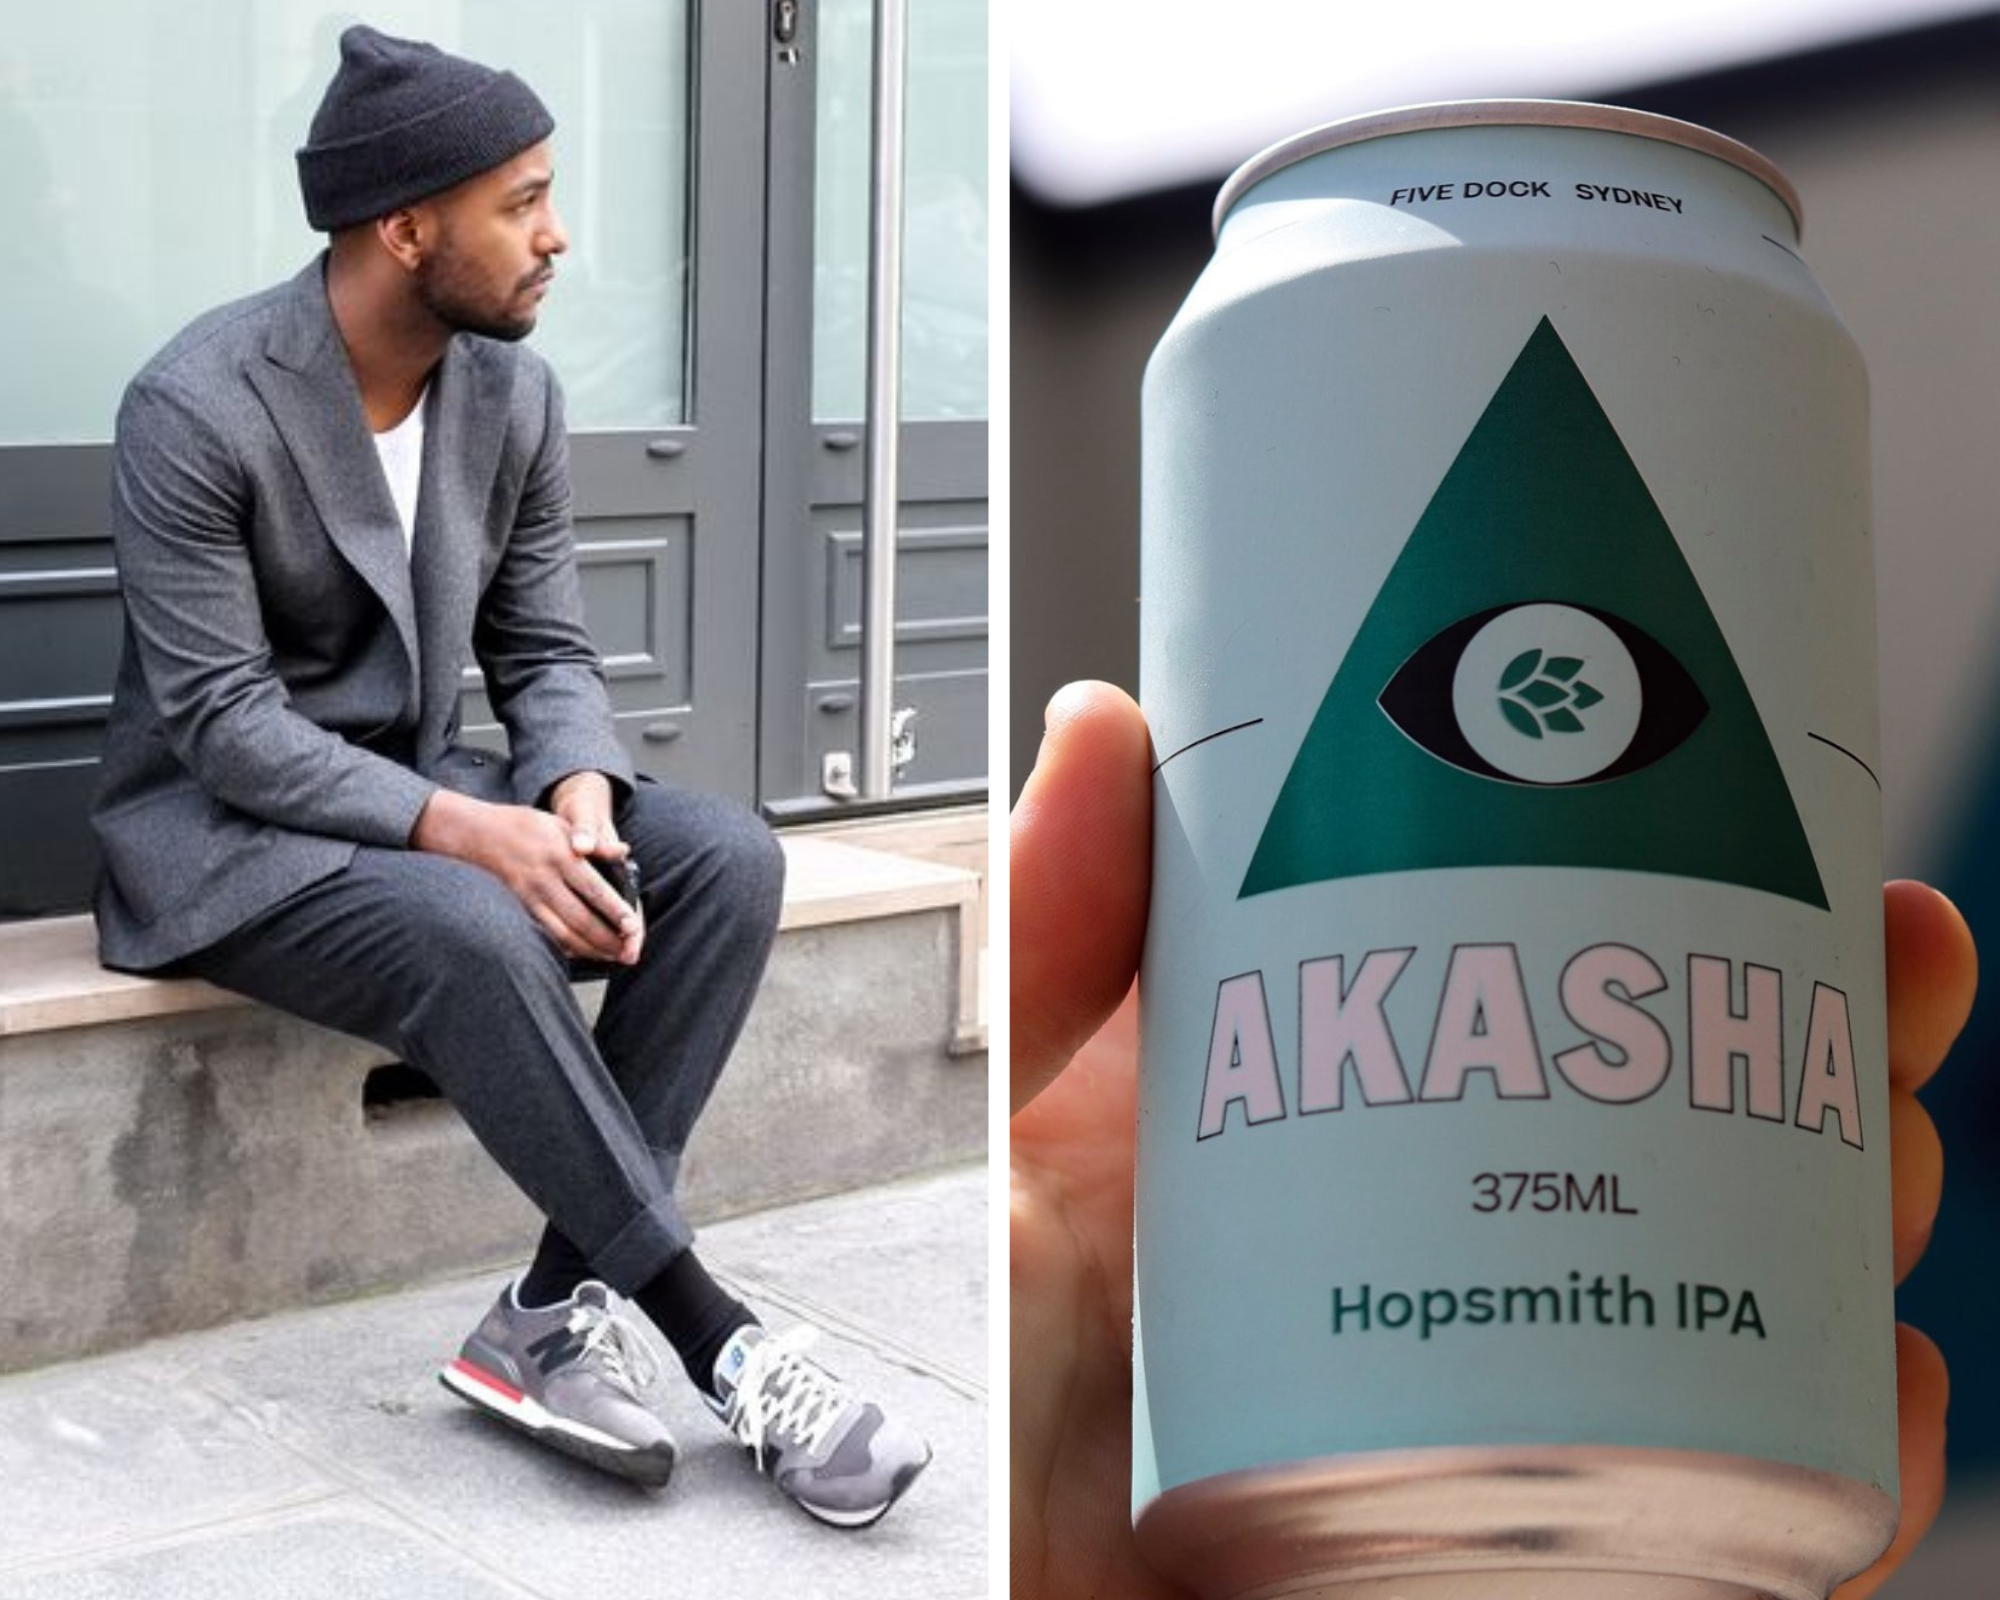 Akasha brewing company Hopsmith IPA - Threadicated - Men's hipster outfit